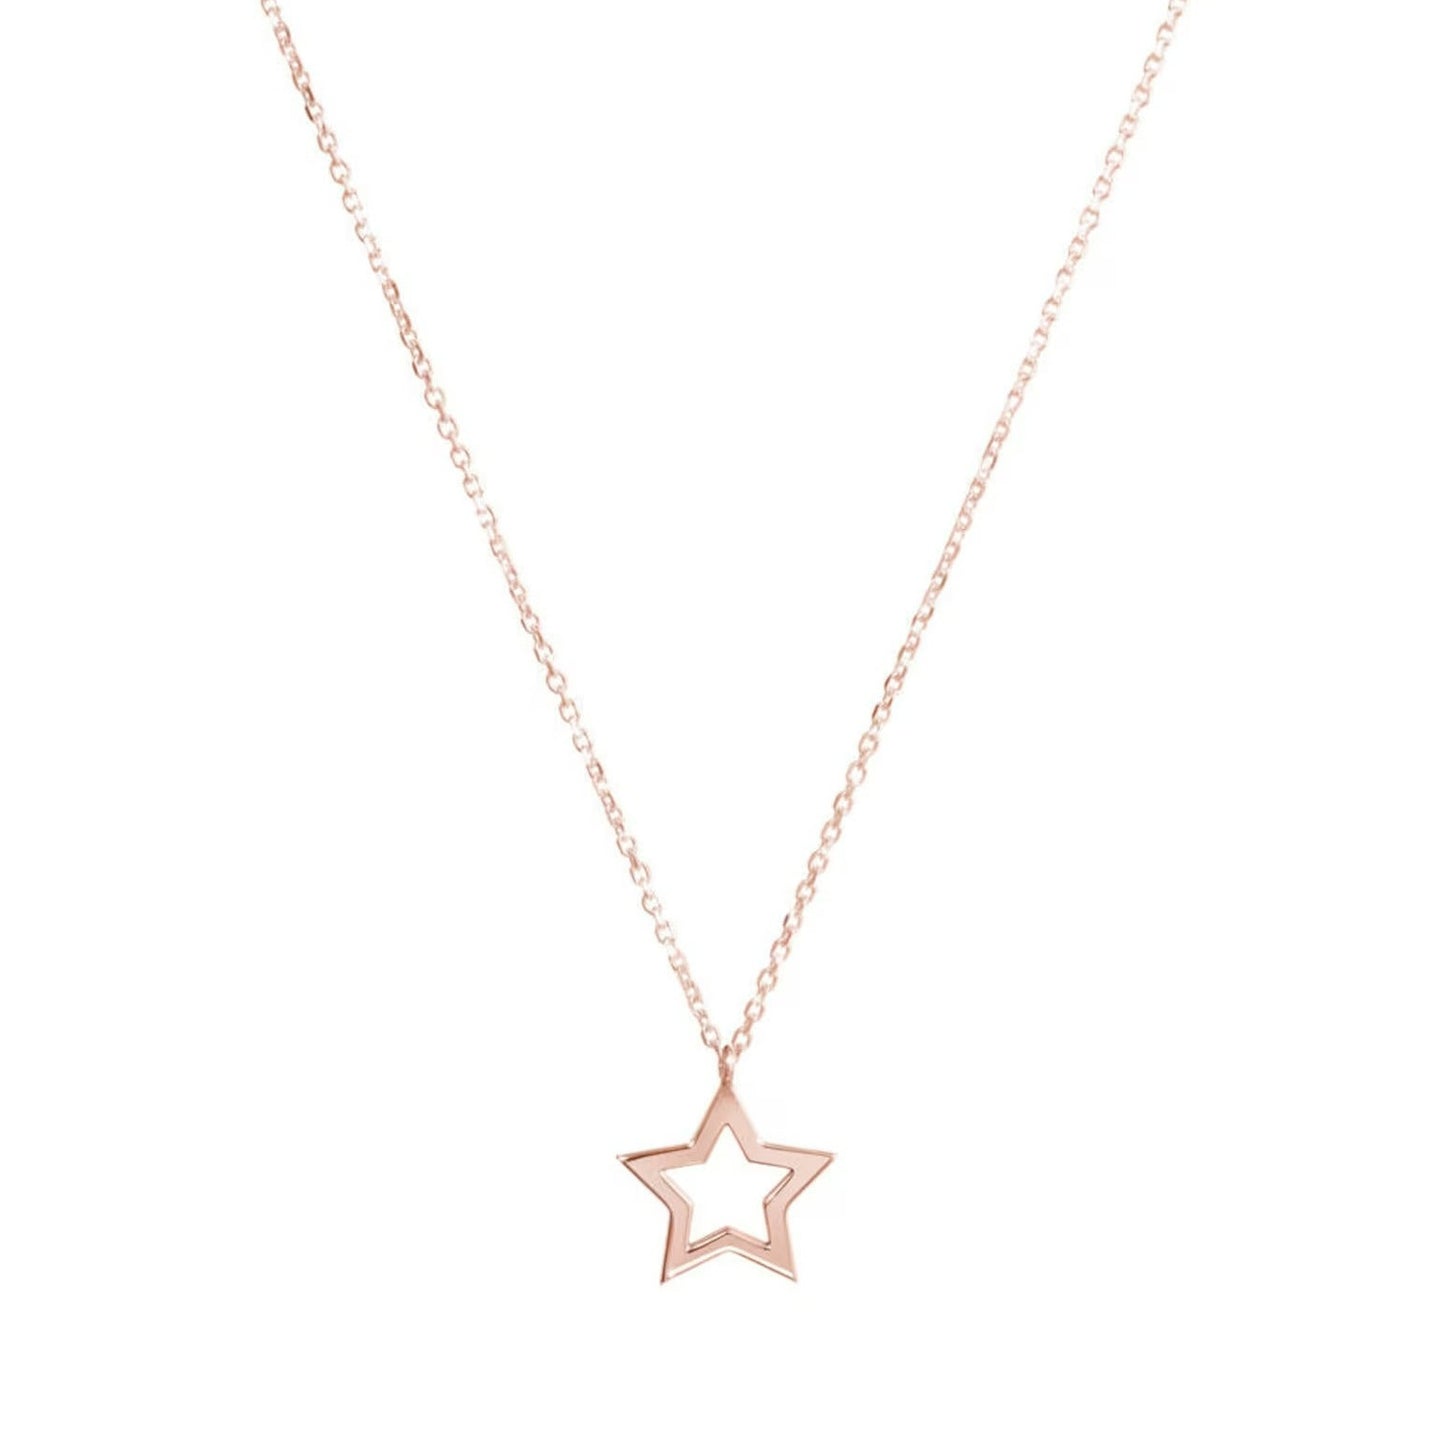 Dazzle in celestial splendor with our 18 carat gold tiny star necklace. A radiant ode to Arabian nights, encapsulating the magic of star-studded skies.